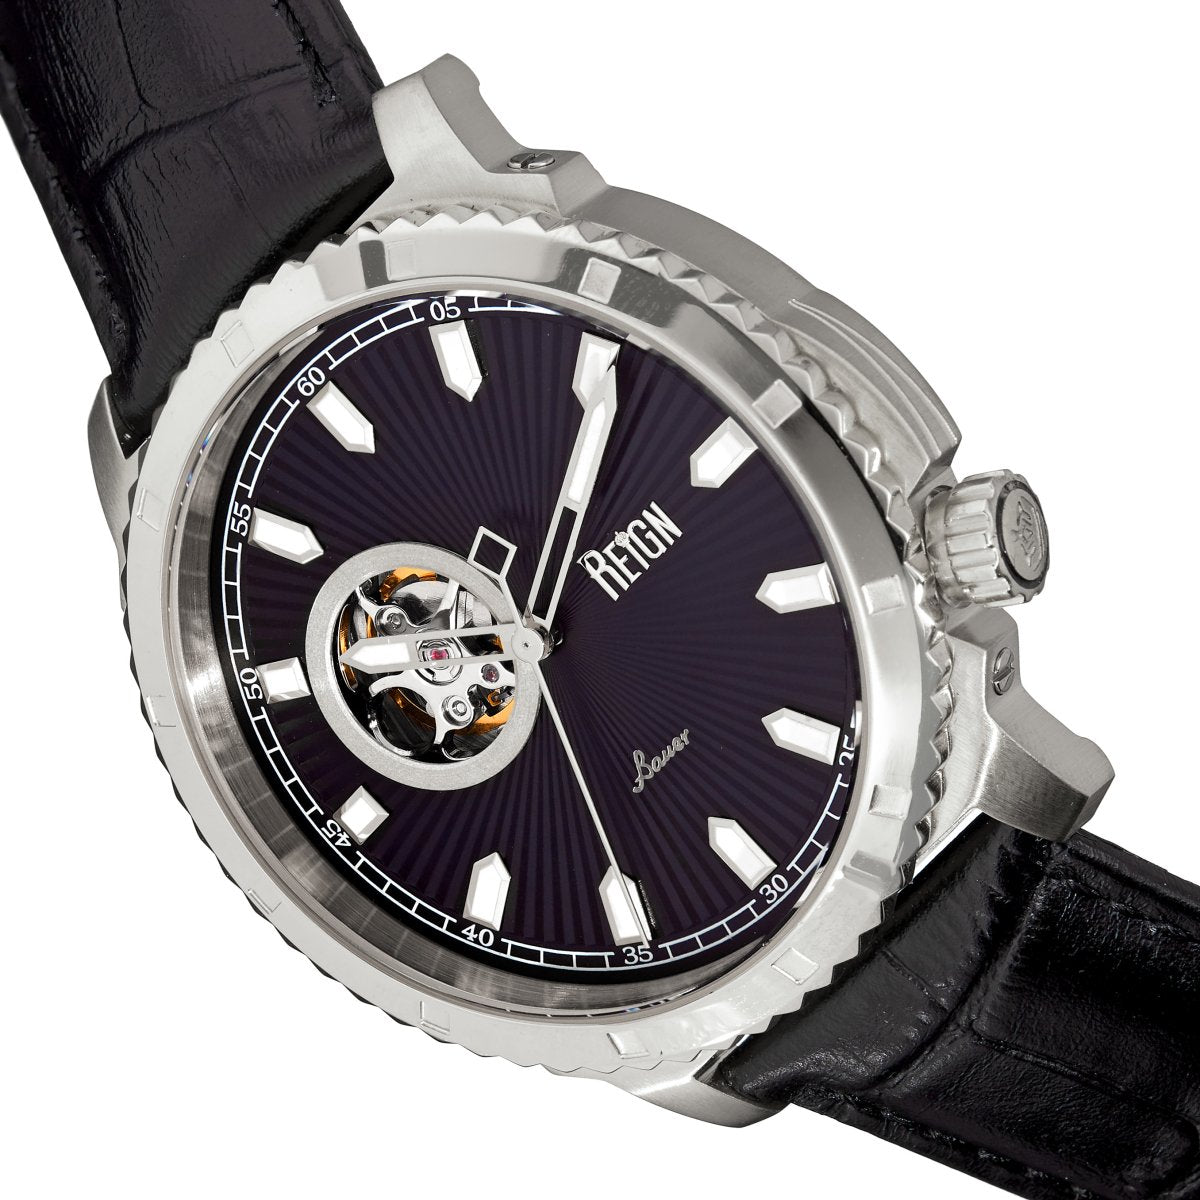 Reign Bauer Automatic Semi-Skeleton Leather-Band Watch - Silver/Black - REIRN6002